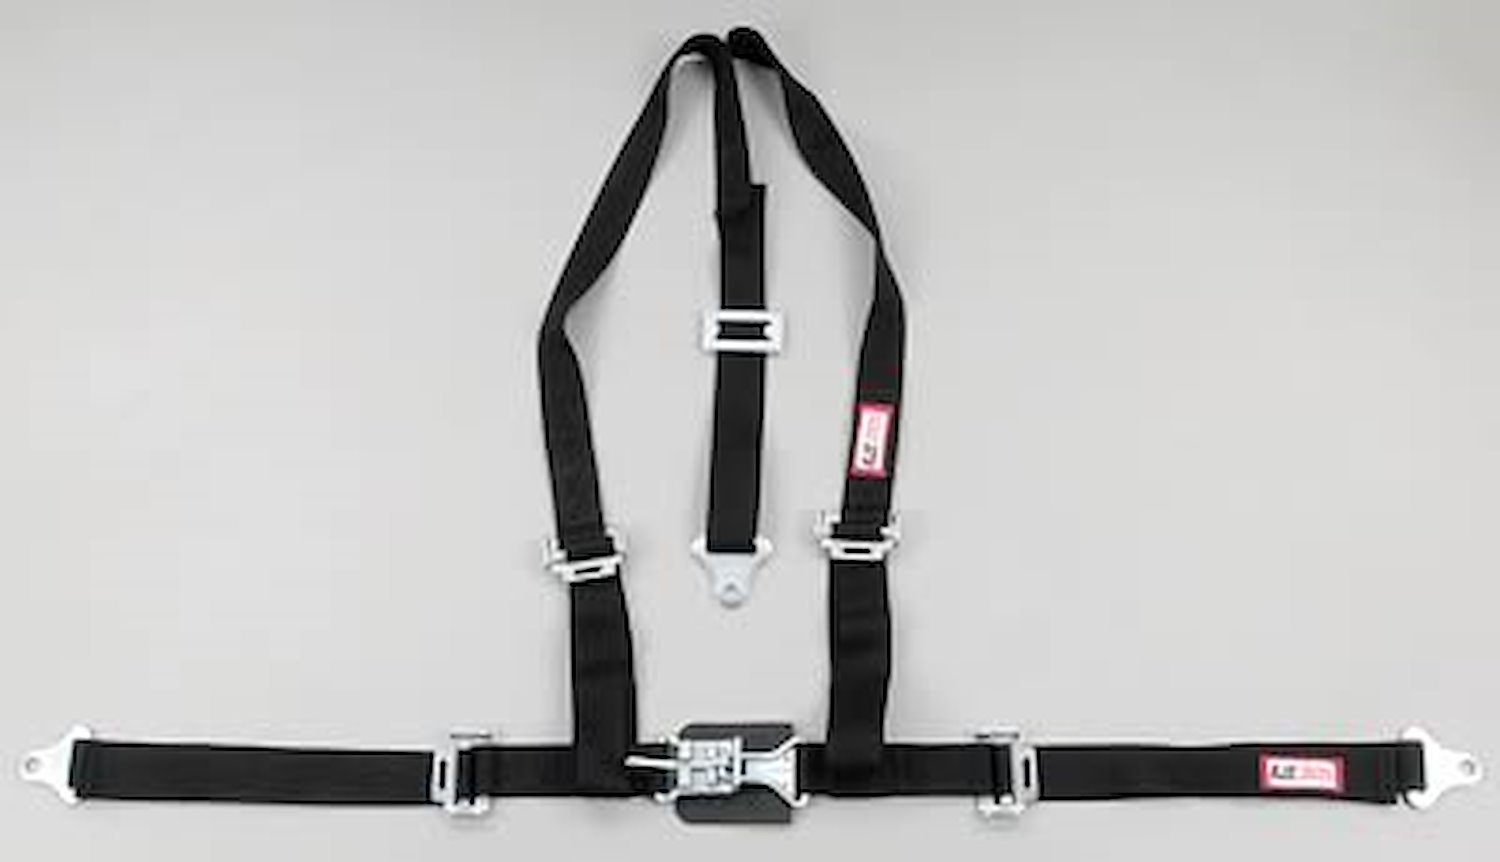 NON-SFI L&L HARNESS 2 PULL DOWN Lap Belt w/Adjuster 2 S.H. Individual FLOOR MOUNT w/STERNUM STRAP ALL WRAP ENDS HOT PINK